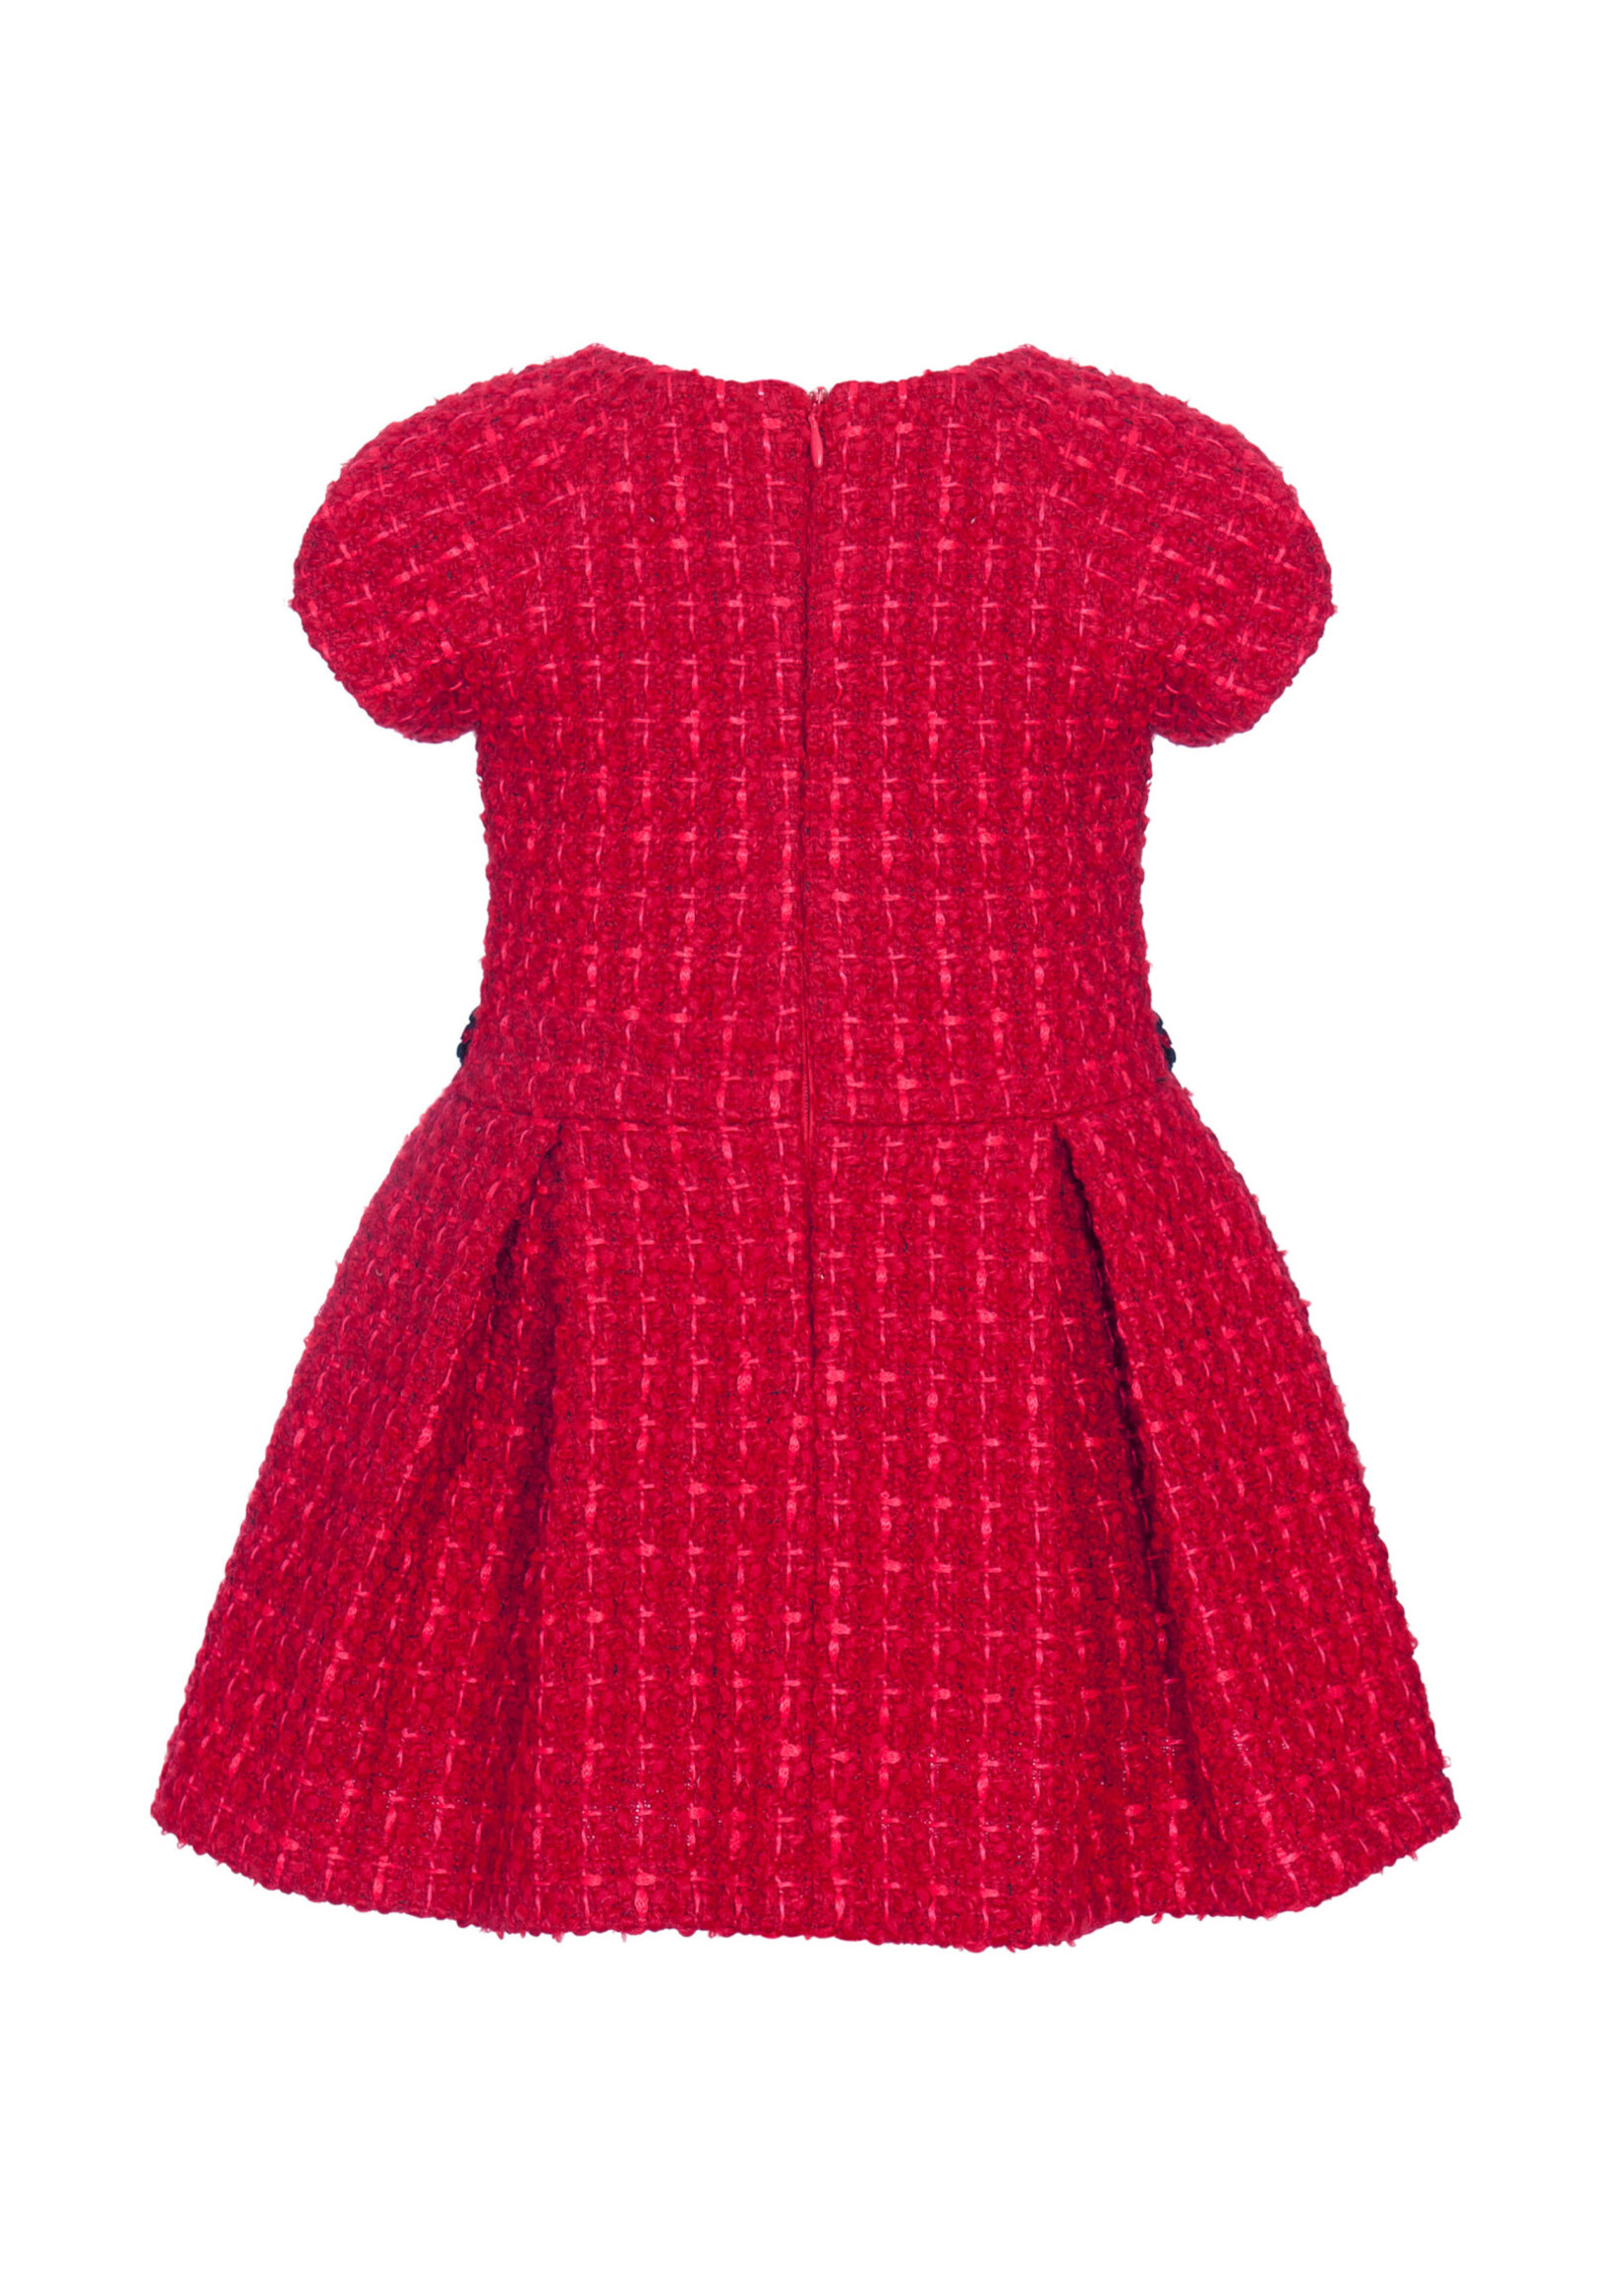 Balloon Chic Balloon Chic  Dress red whith gold button